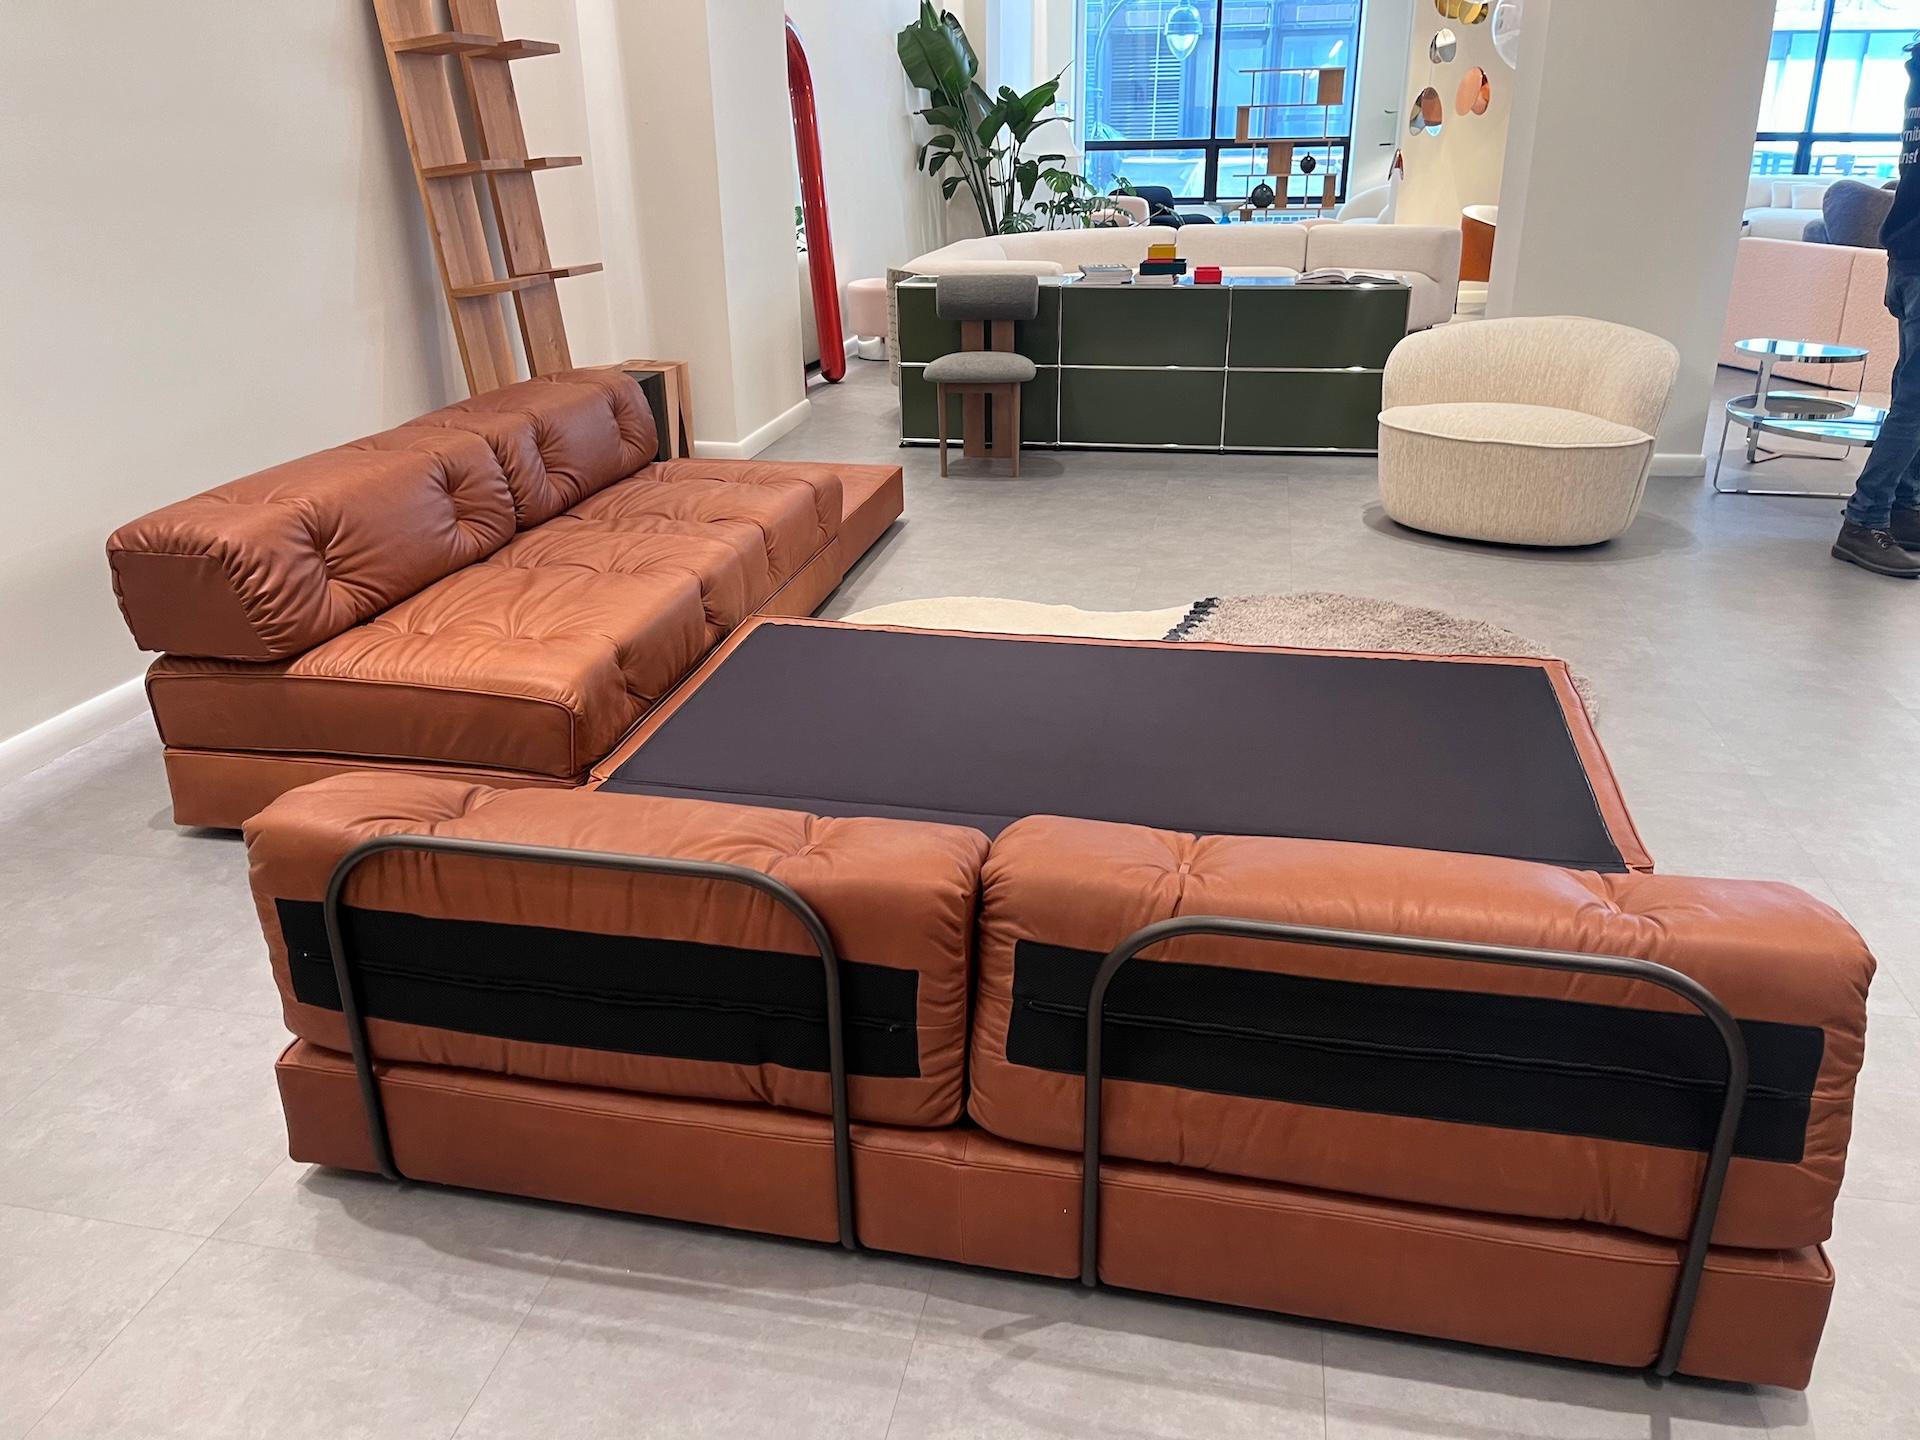 Wittmann Leather Atrium Sofa Bed with Tray Element by Wittmann Workshop in STOCK 3